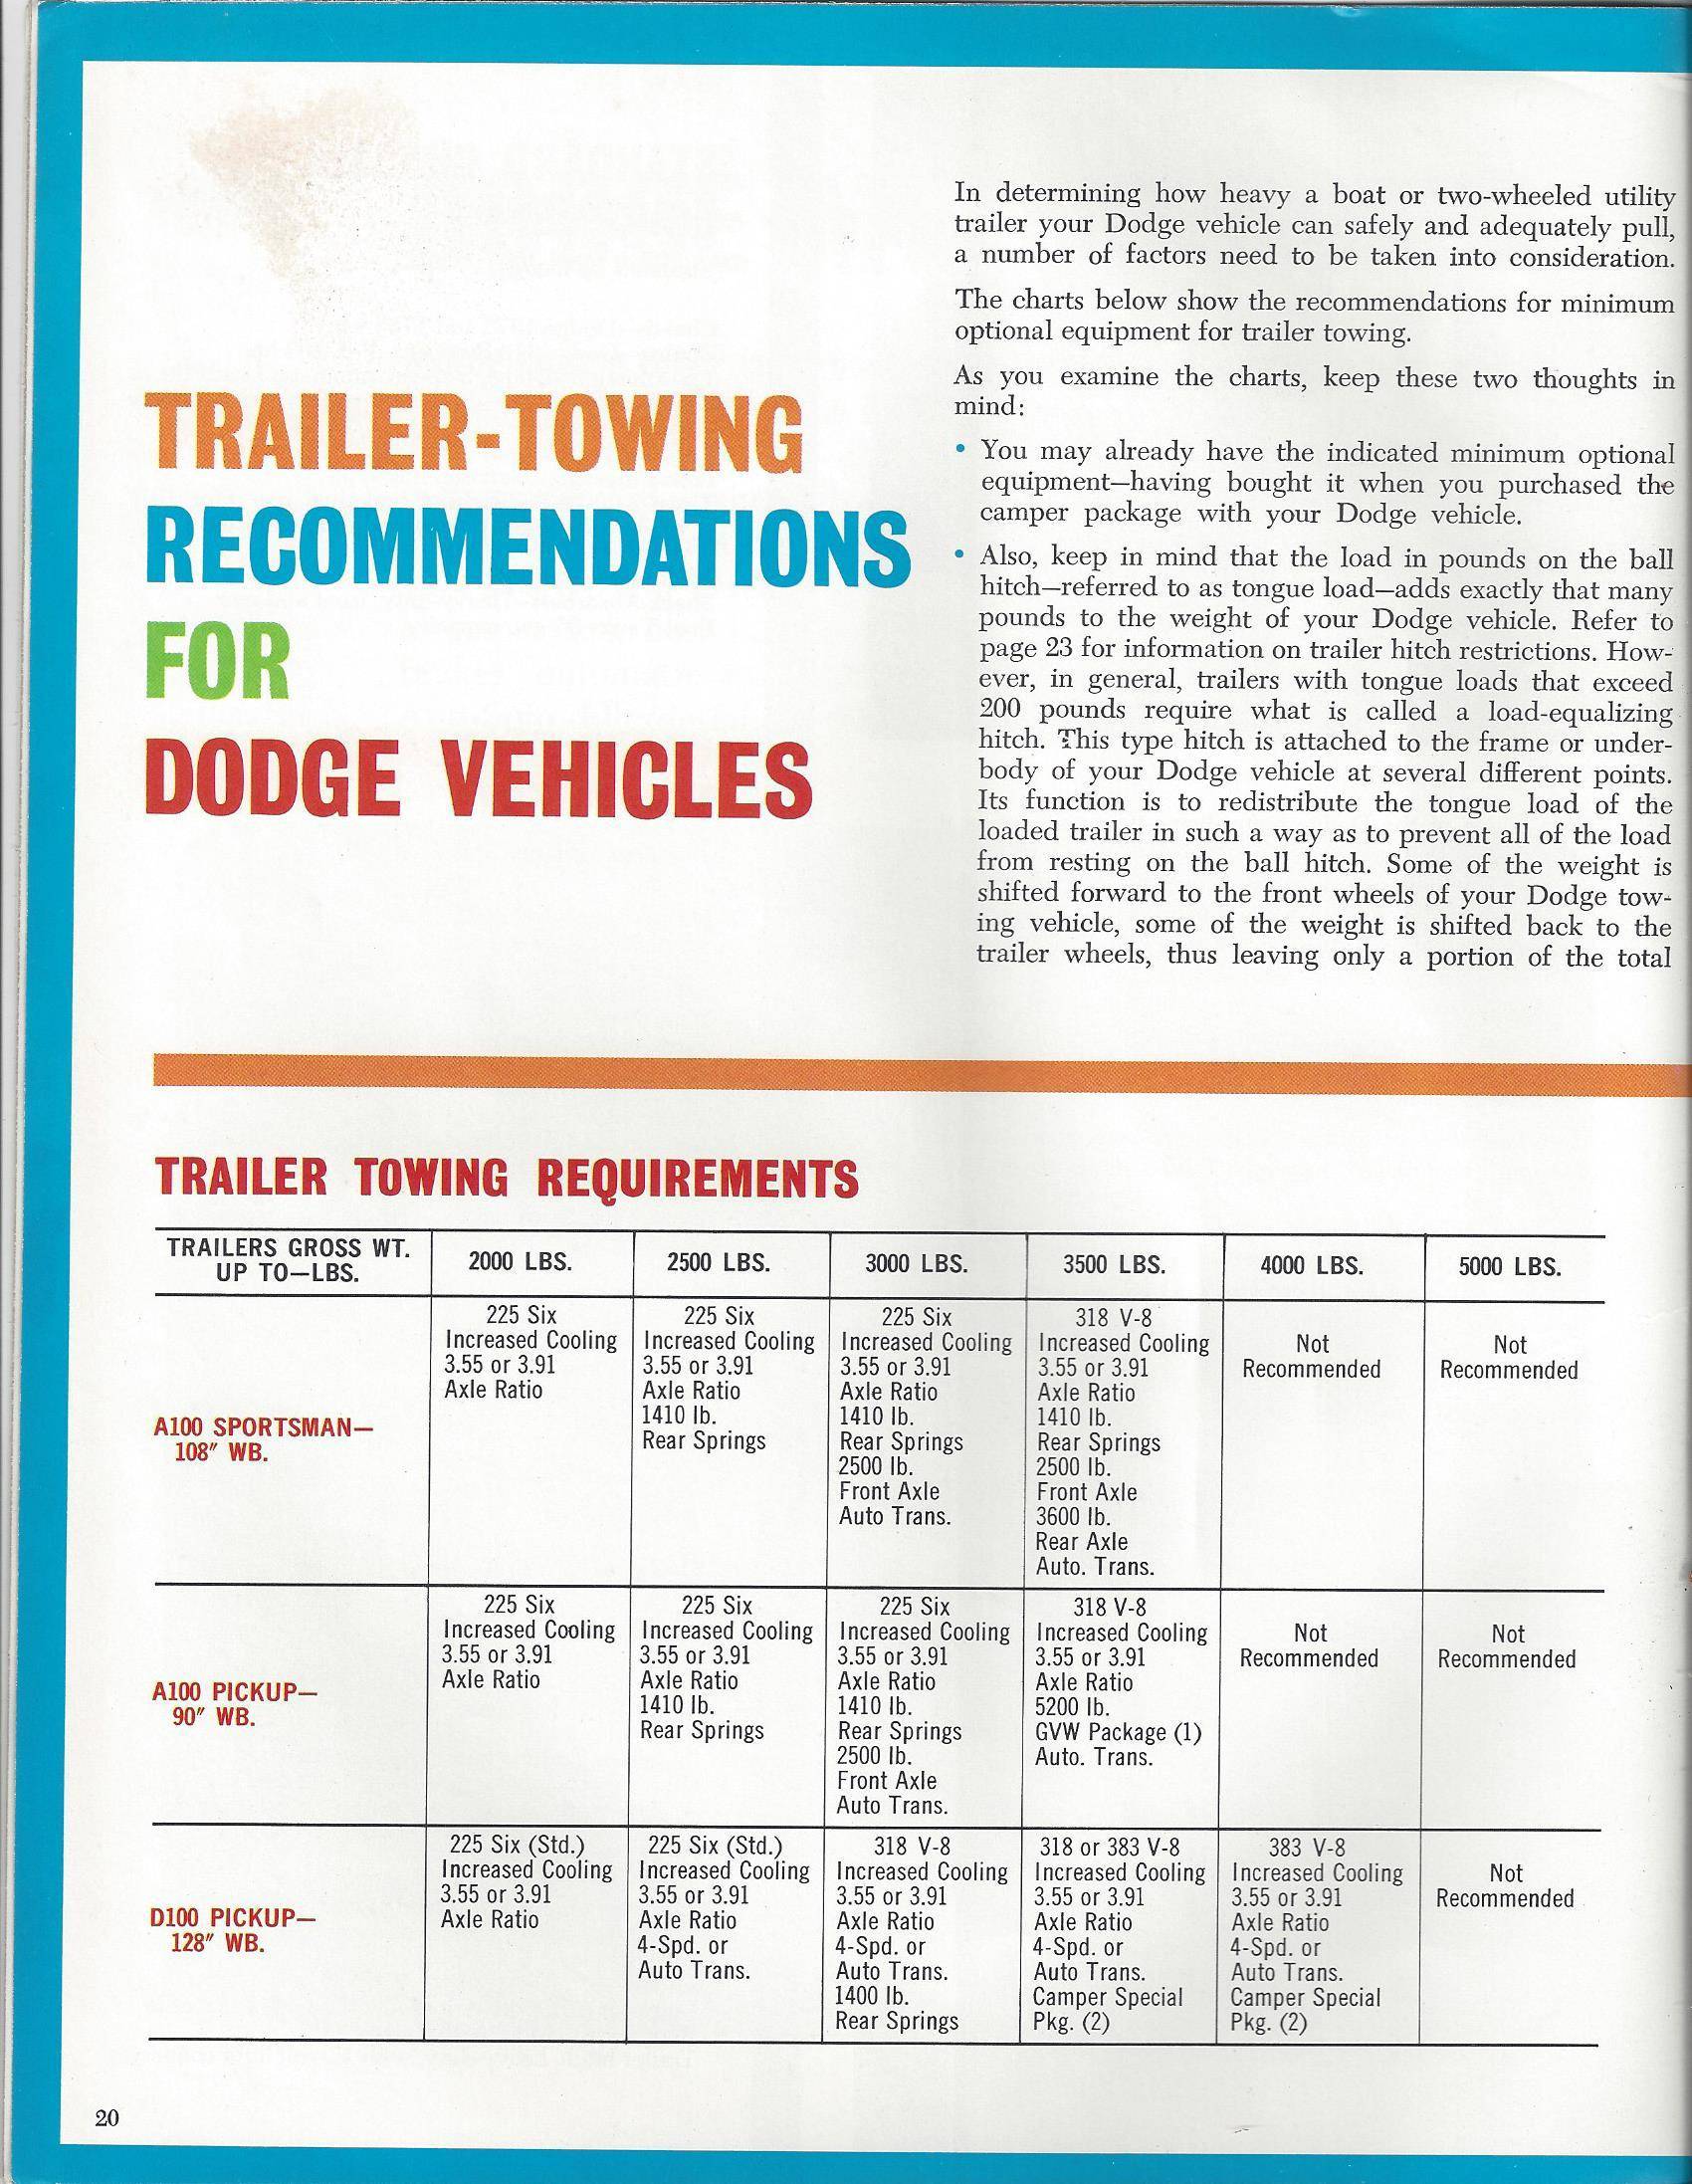 Go Camping With Dodge - pg 20.jpg